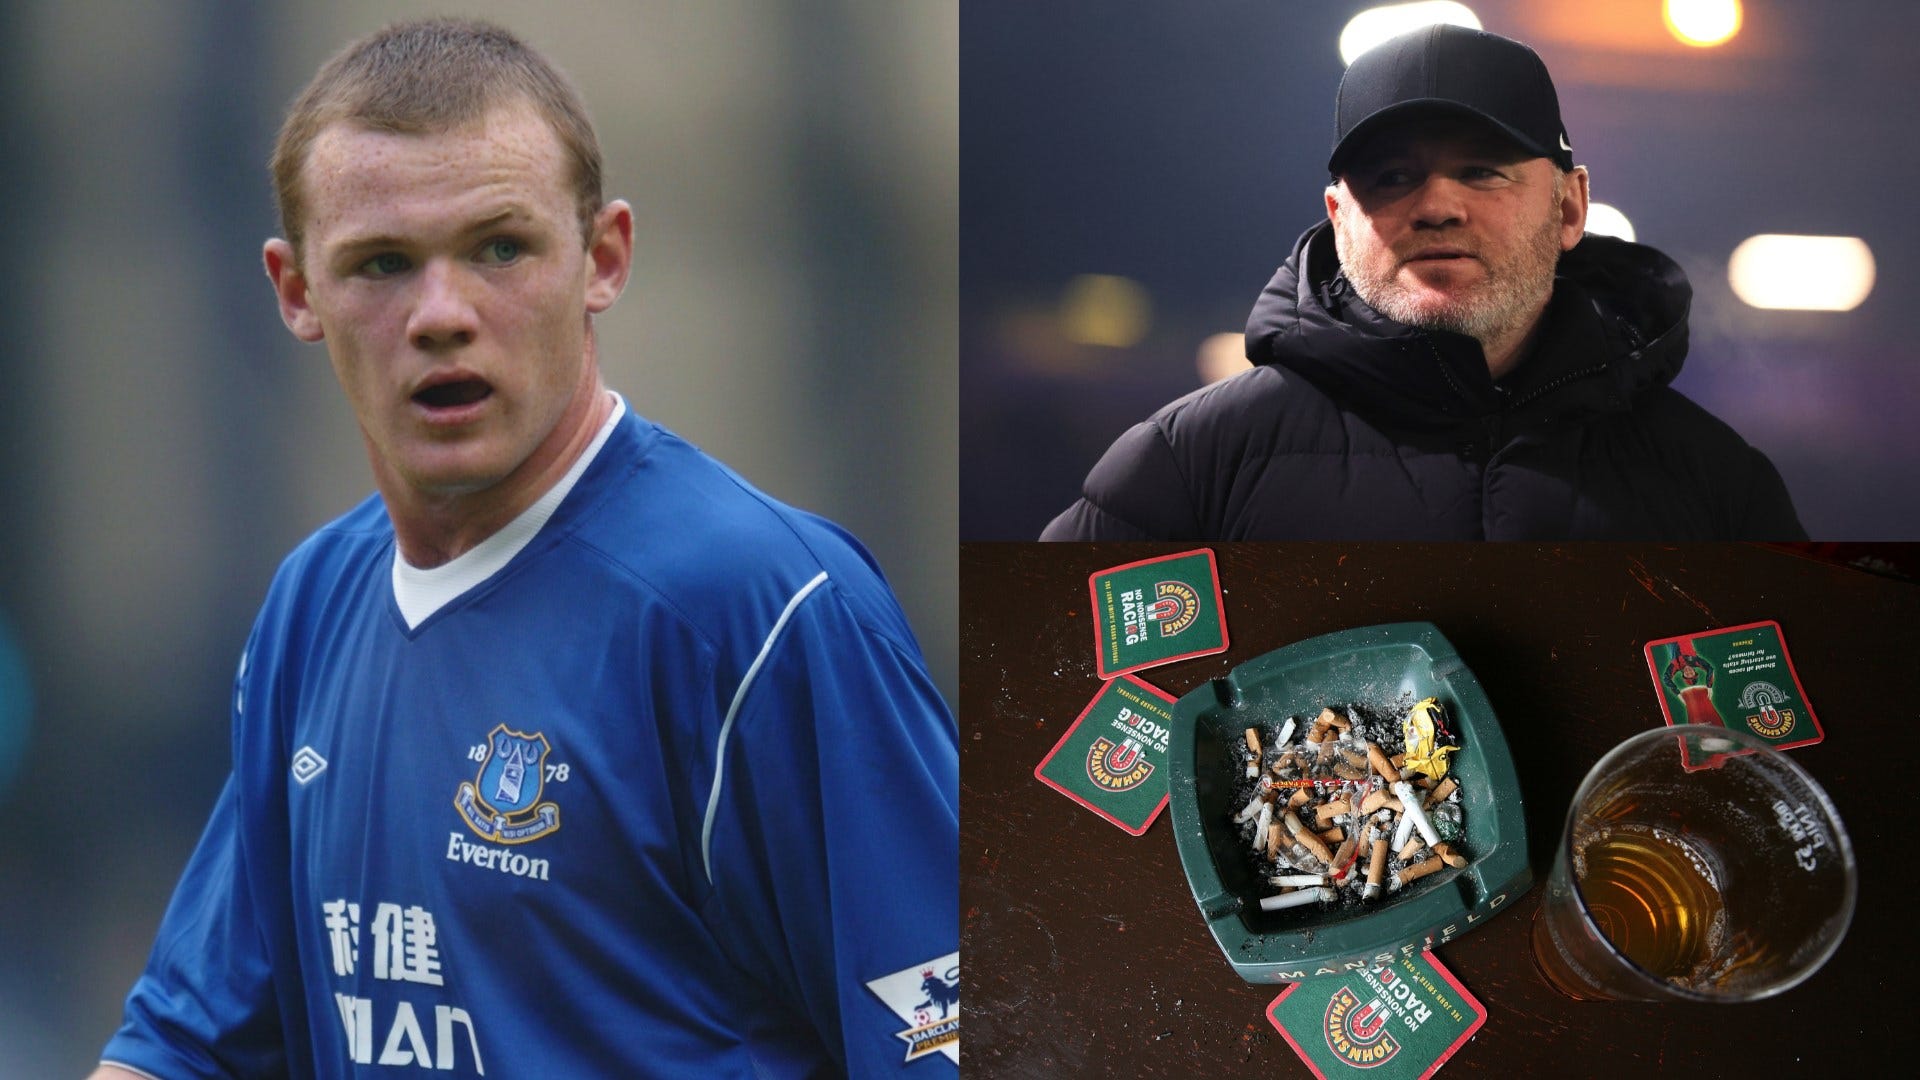 VIDEO: Man Utd legend Wayne Rooney hilariously admits Everton U19 coach caught him with 'a bag of cider and packet of cigarettes' when he was just 14